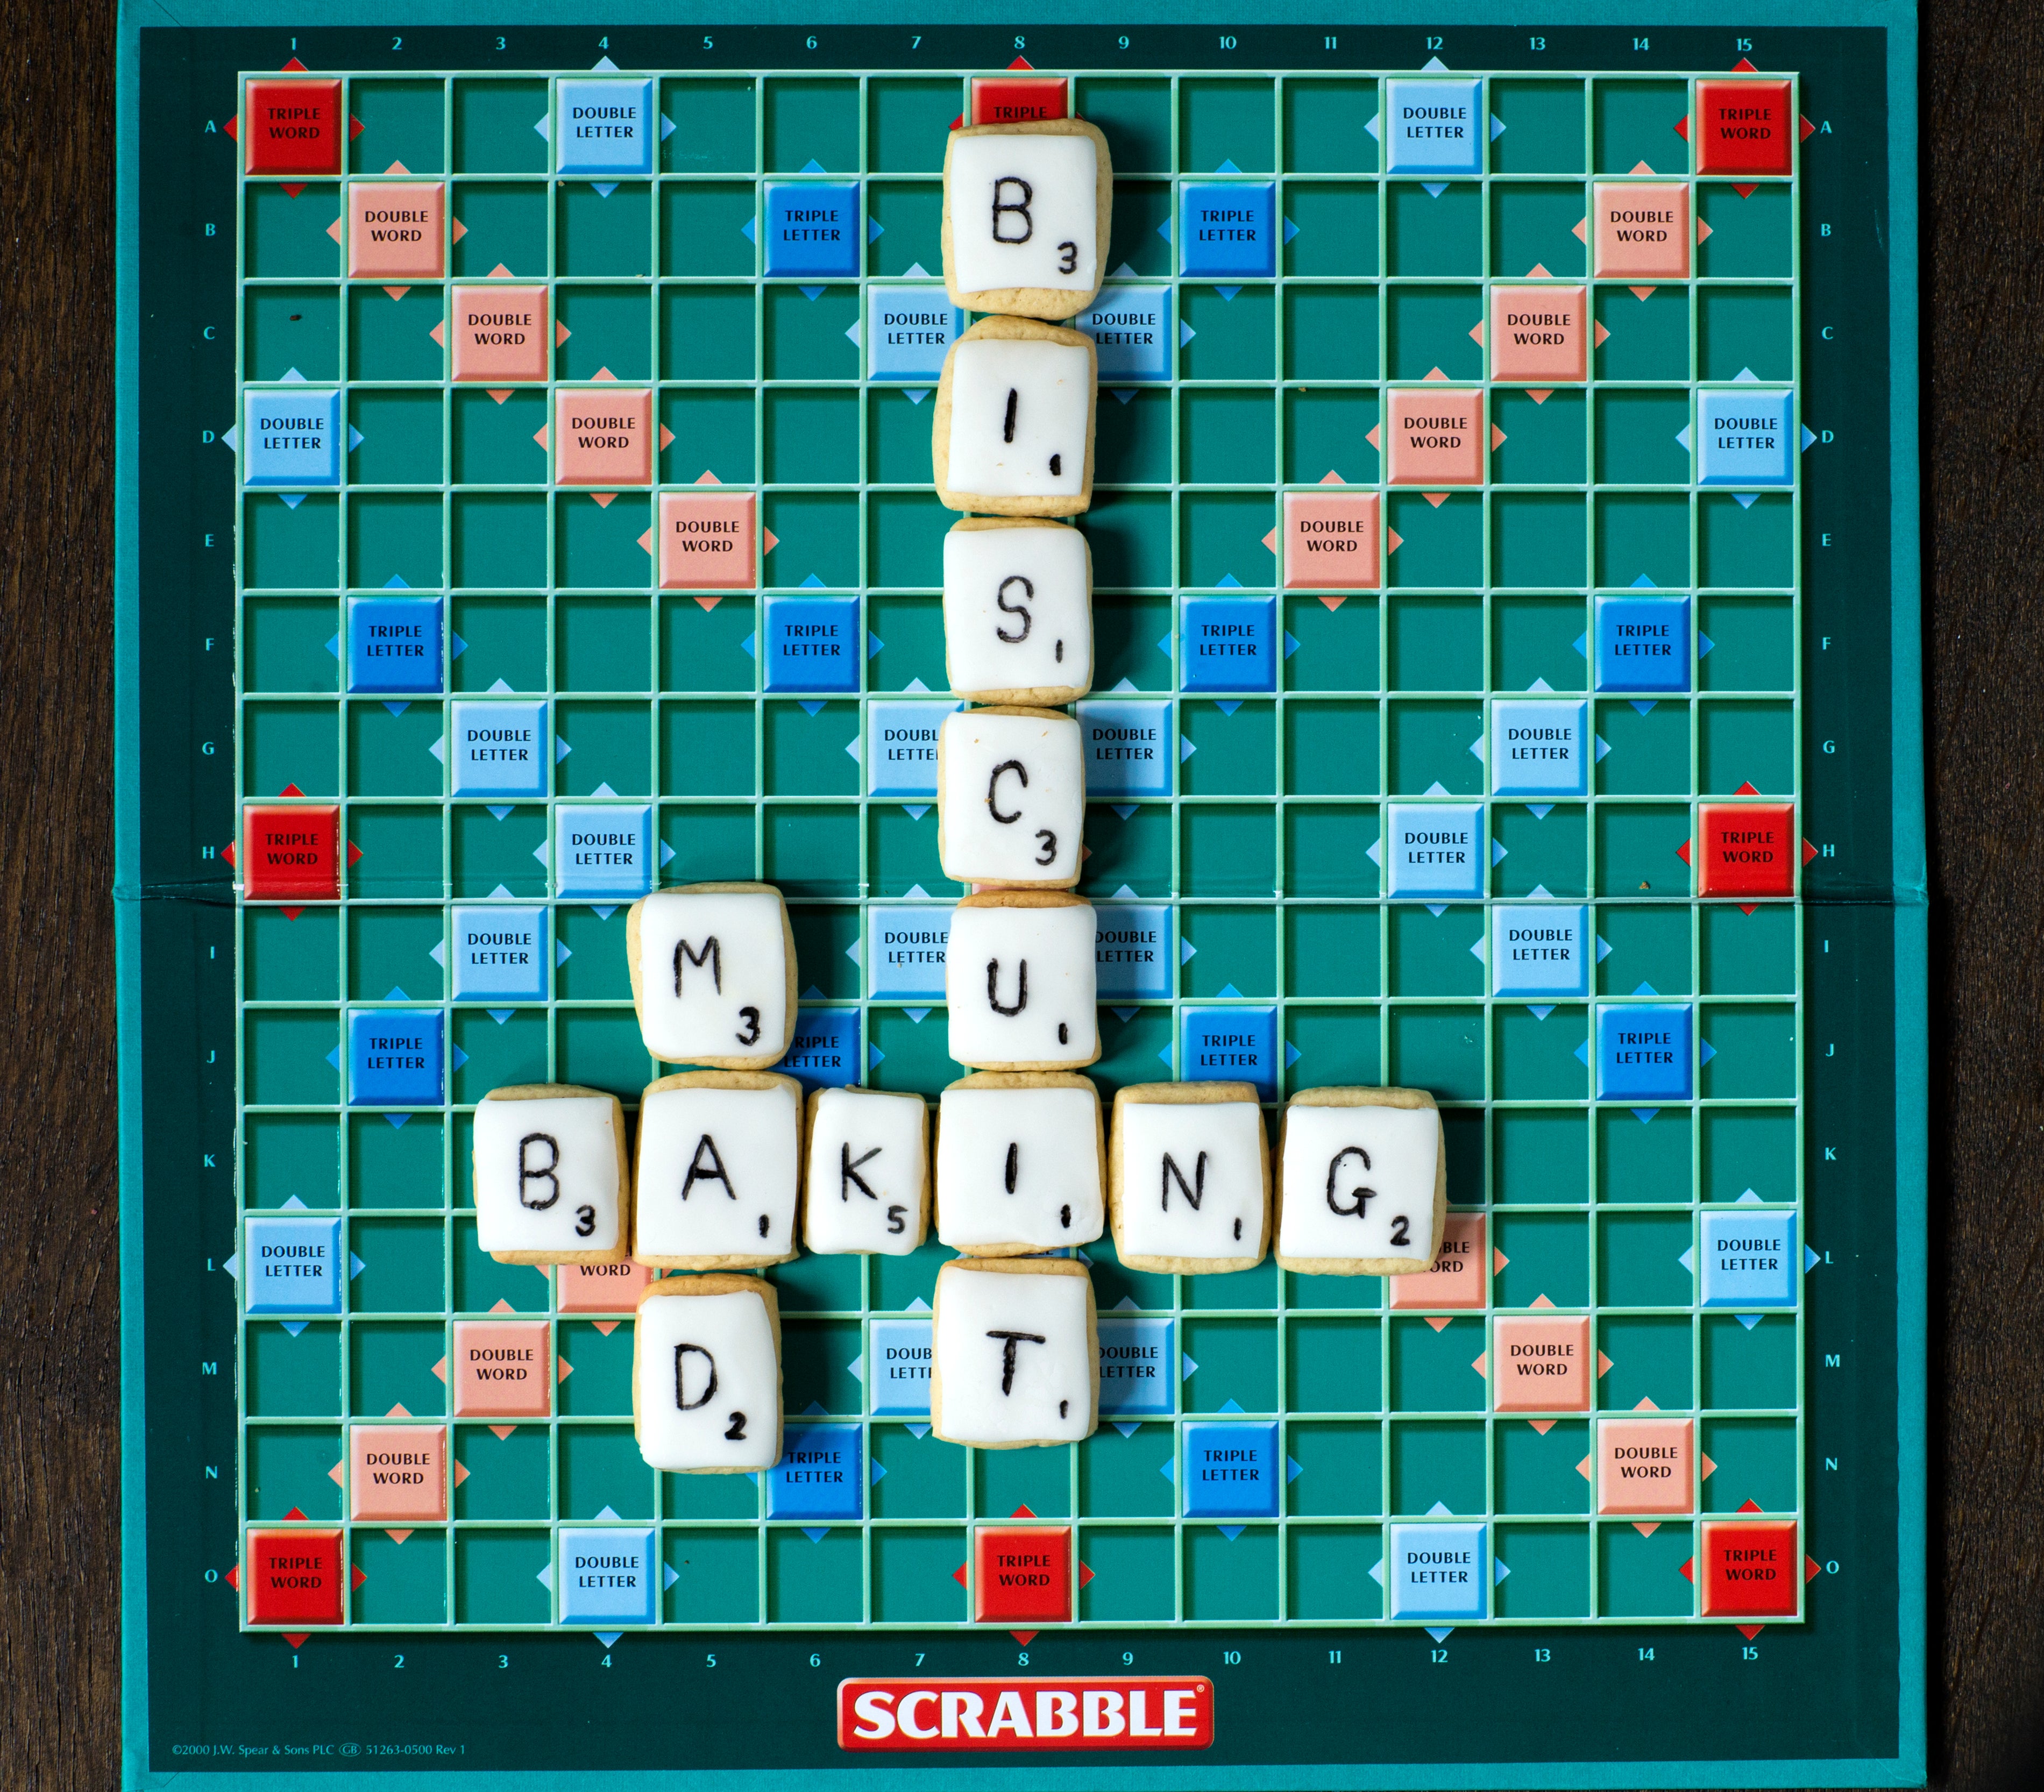 Overhead shot of a scrabble board with iced biscuits on